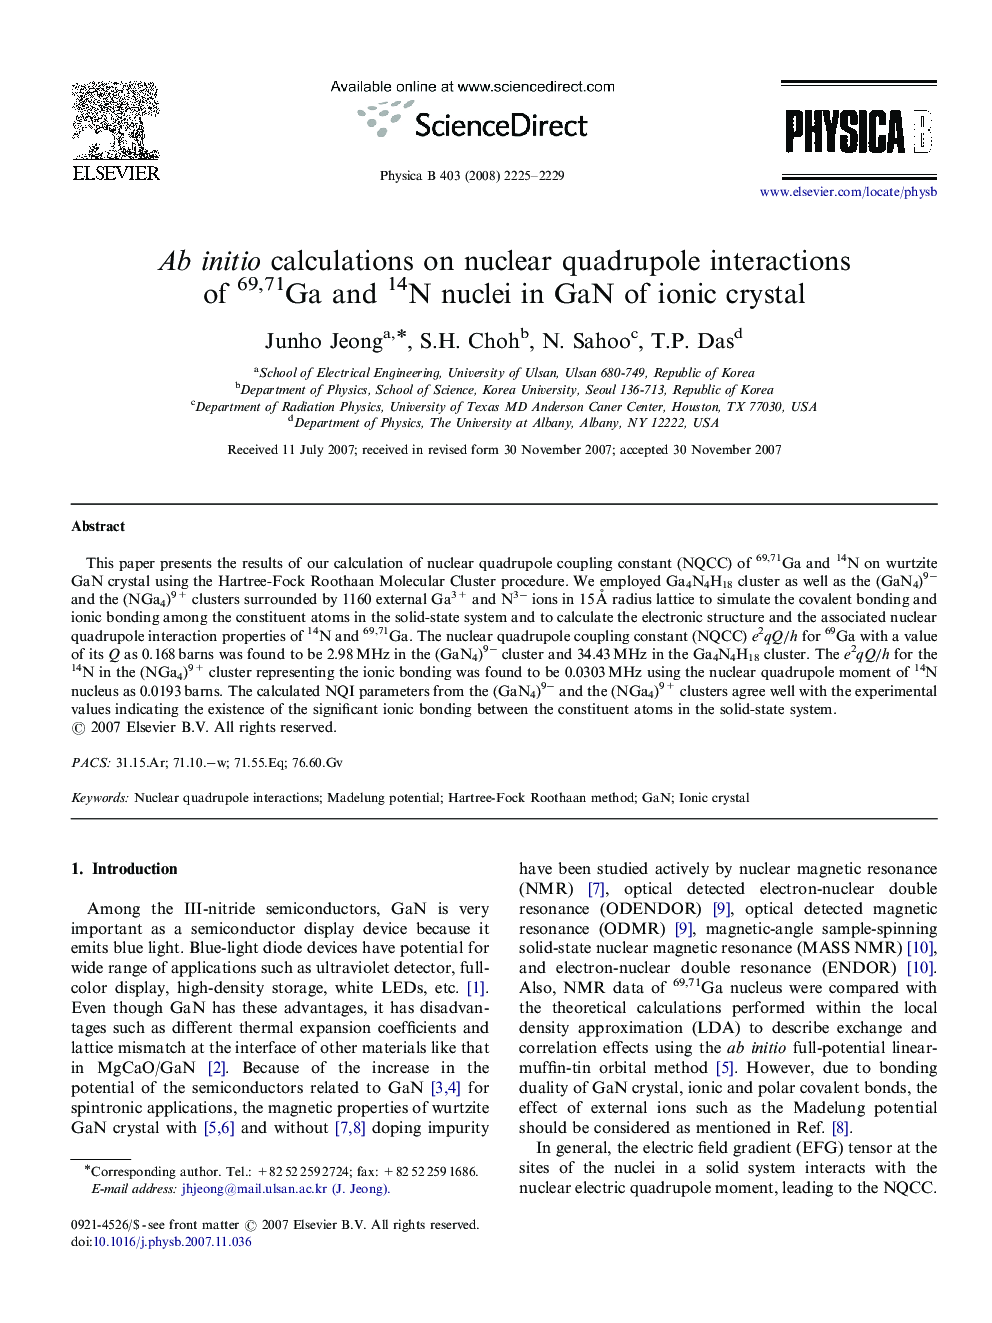 Ab initio calculations on nuclear quadrupole interactions of 69,71Ga and 14N nuclei in GaN of ionic crystal